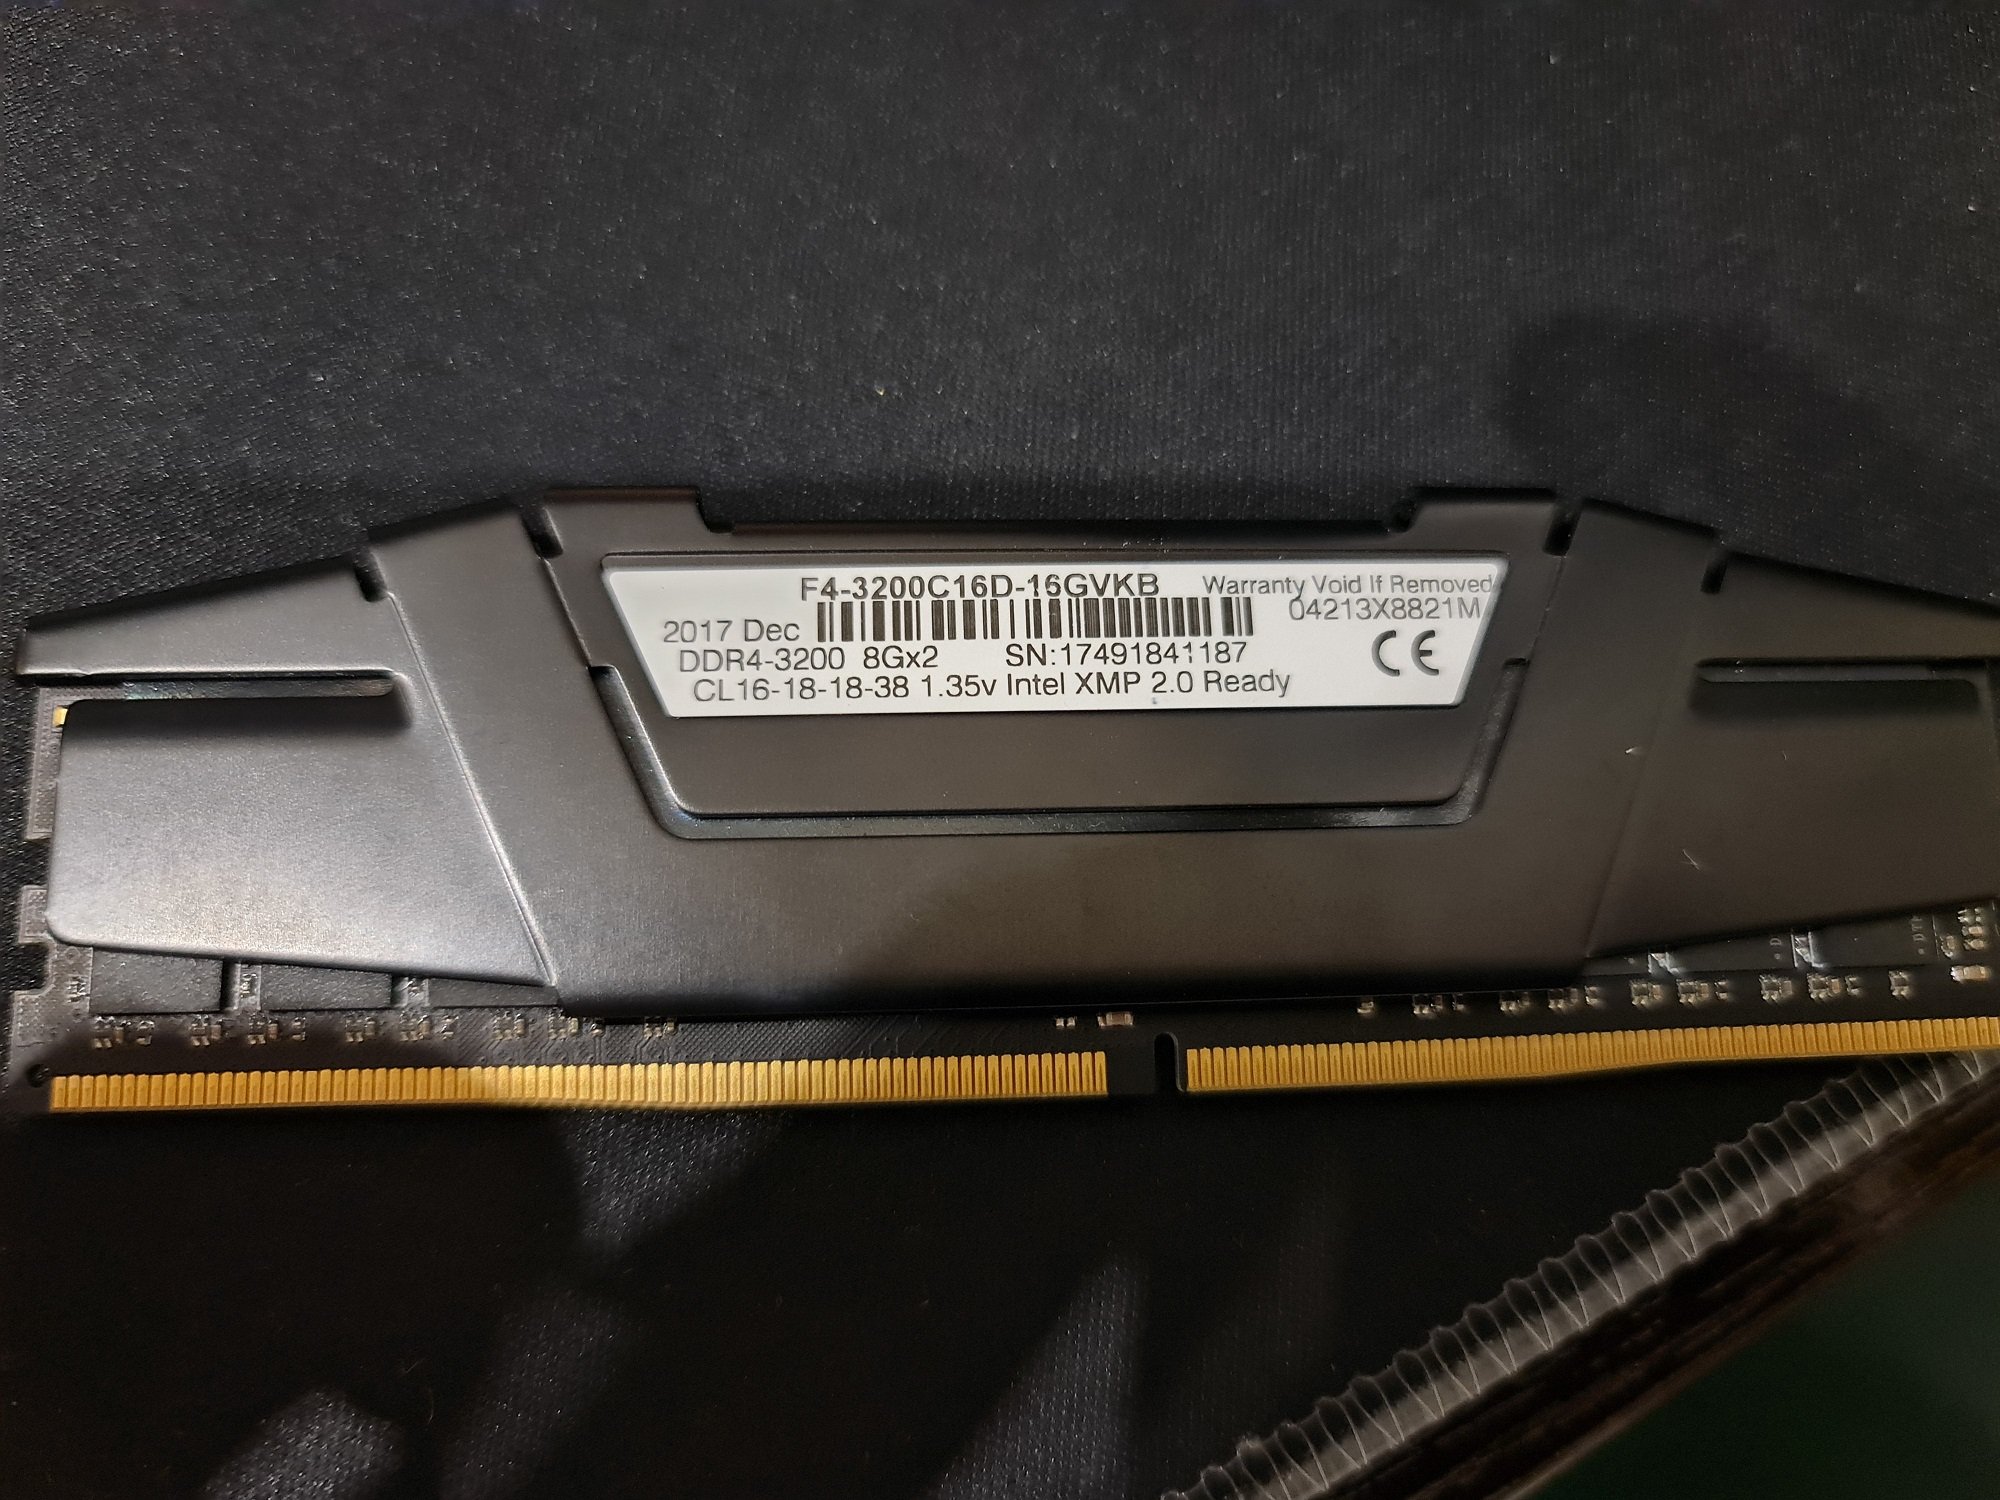 More information about "4 x 8GB DDR4 GSKILL RIPJAWS CL16 - 3200"